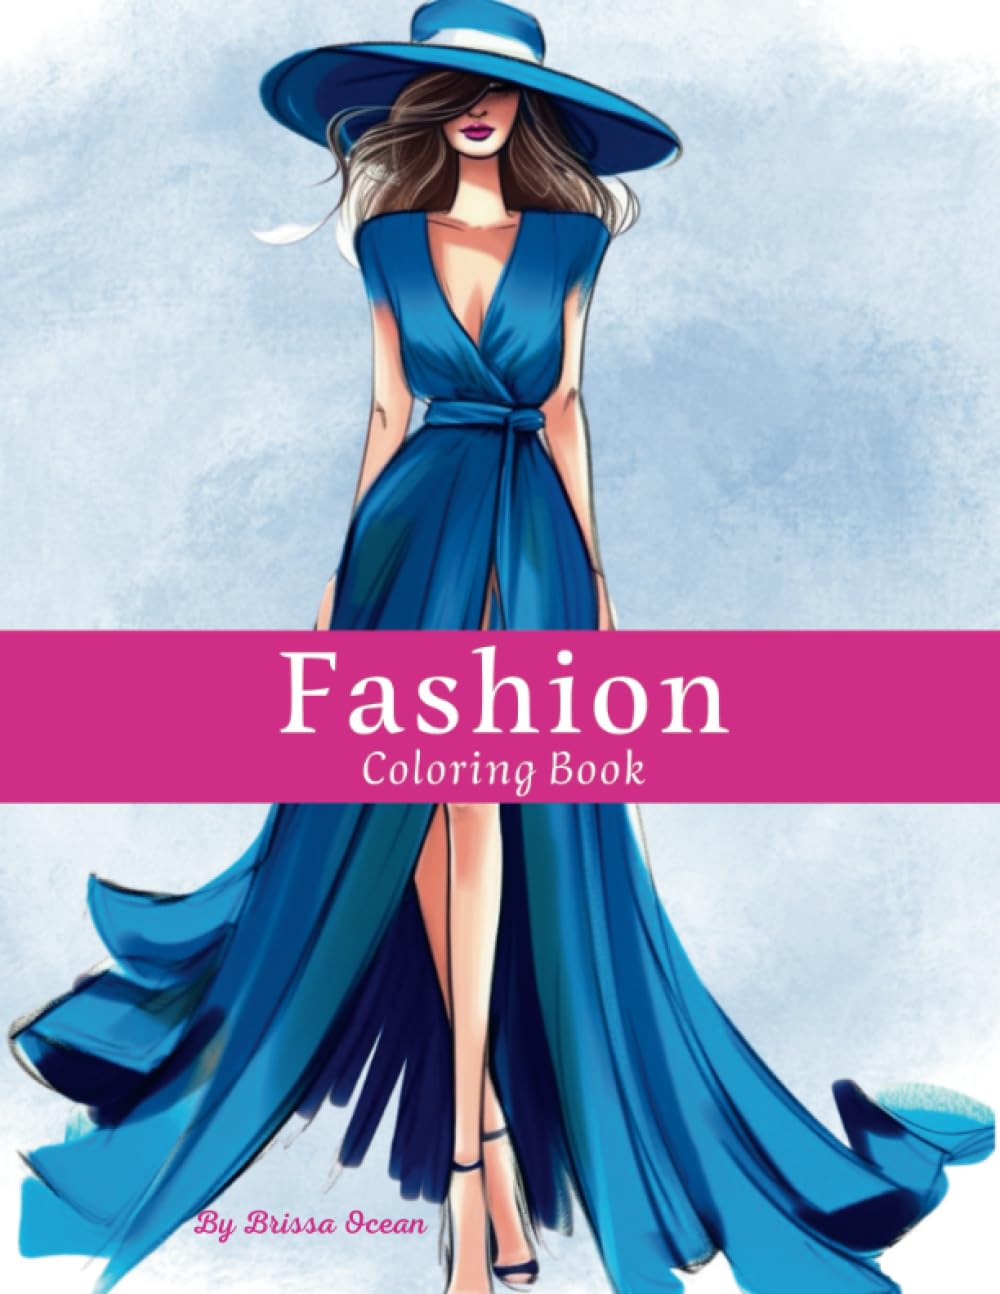 Fashion Coloring Book For Adults. Glamour and Glitz: A Sparkling Coloring Book for Fashionable Adults: Get Creative with These 55 Dazzling and Trendy Designs. Coloring Book For Adults Relaxation.